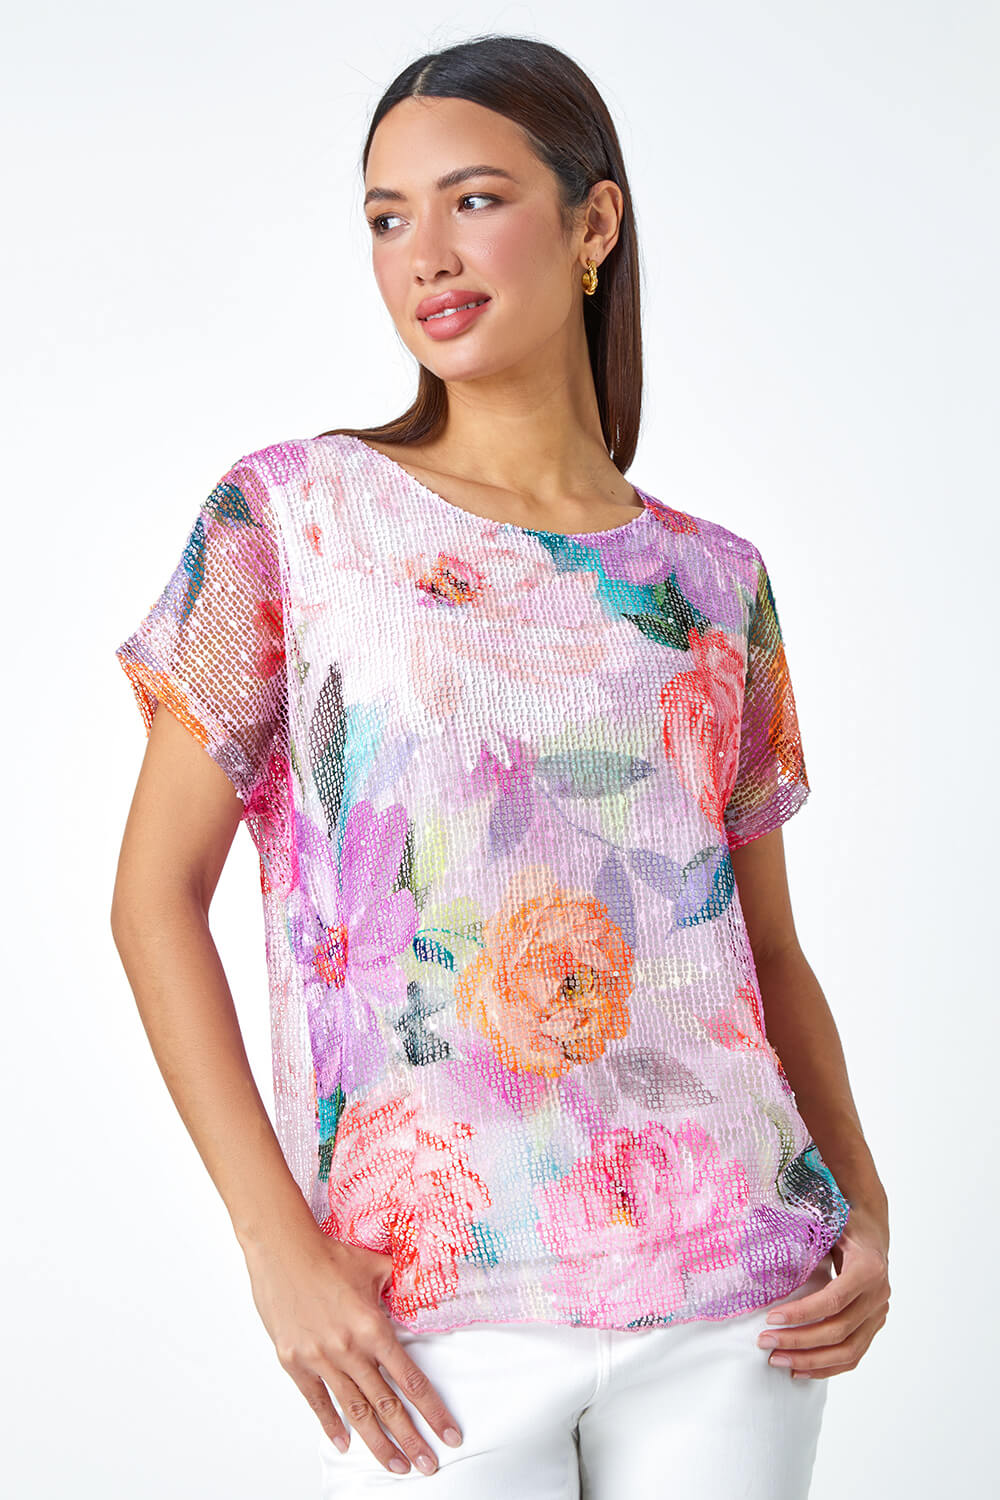 PINK Mesh Overlay Floral Print T-Shirt, Image 4 of 5